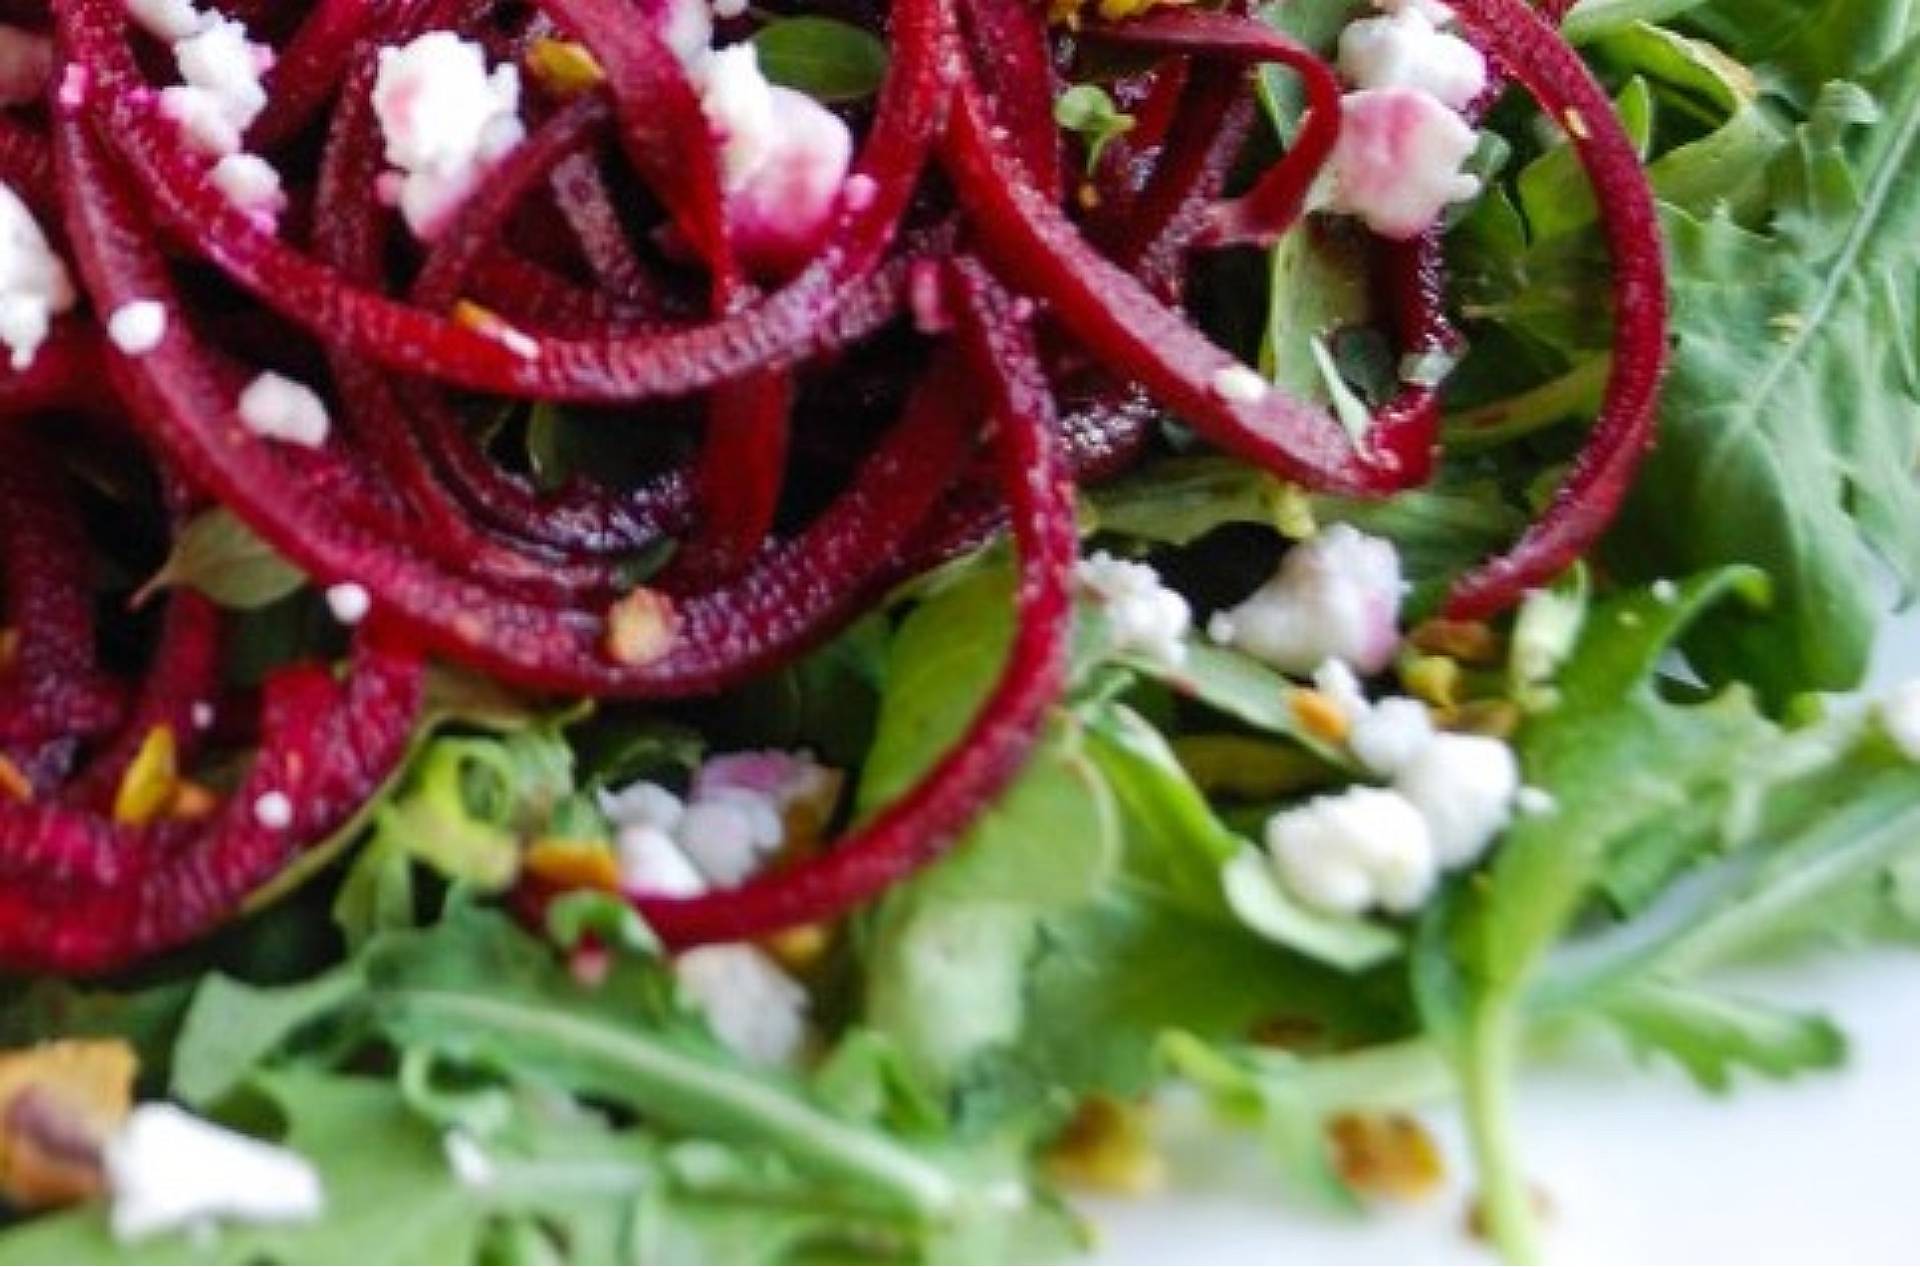 Spiralized Beet Salad with Walnuts and Cheese